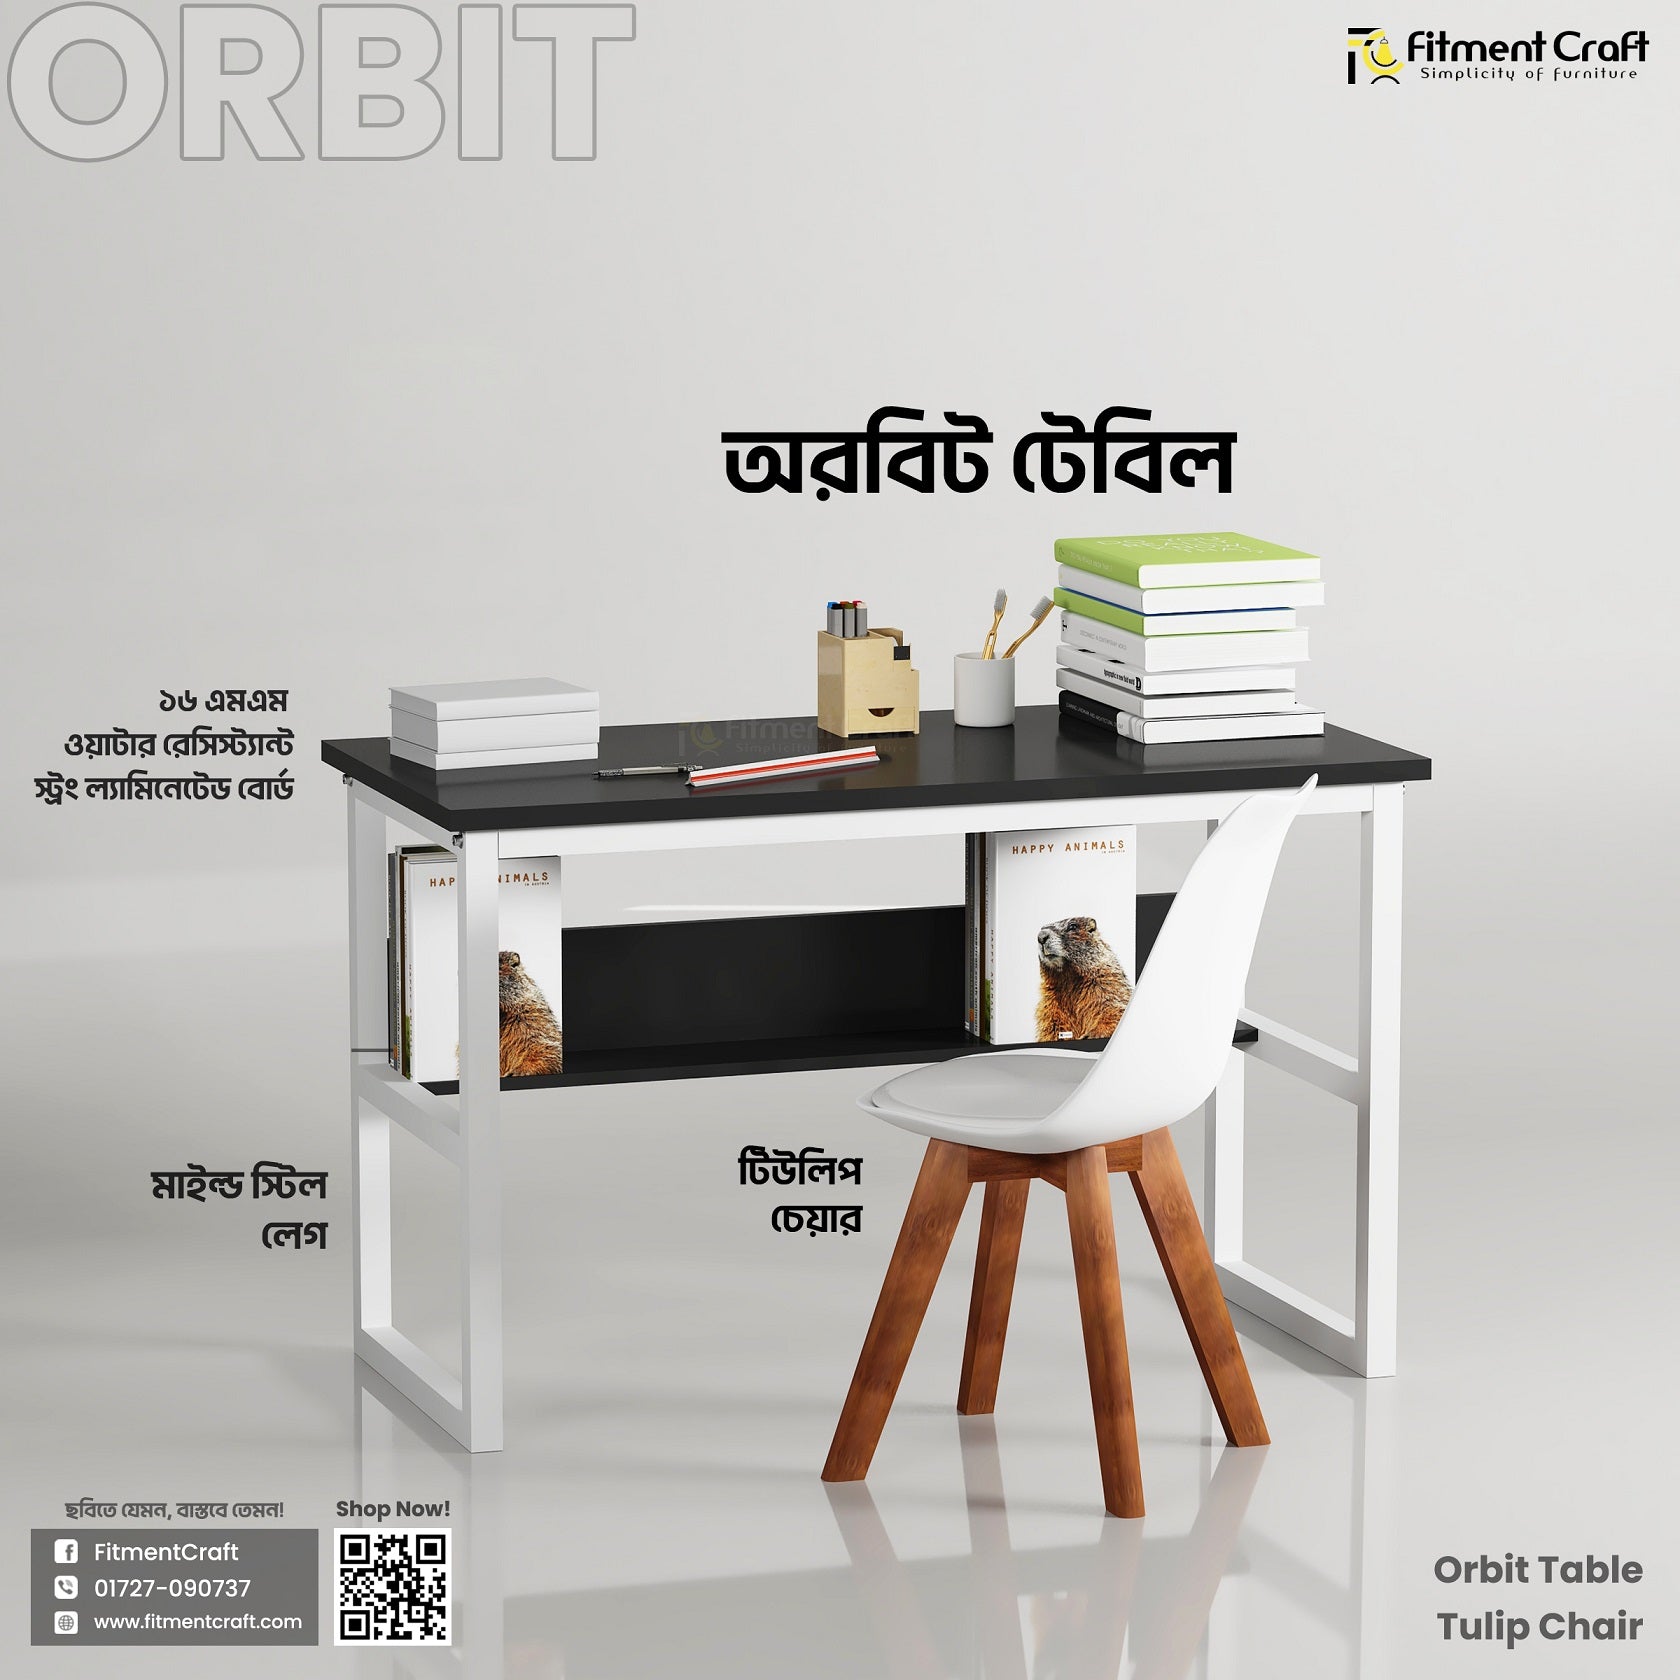 Orbit Table with Tulip Chair | CMB-007